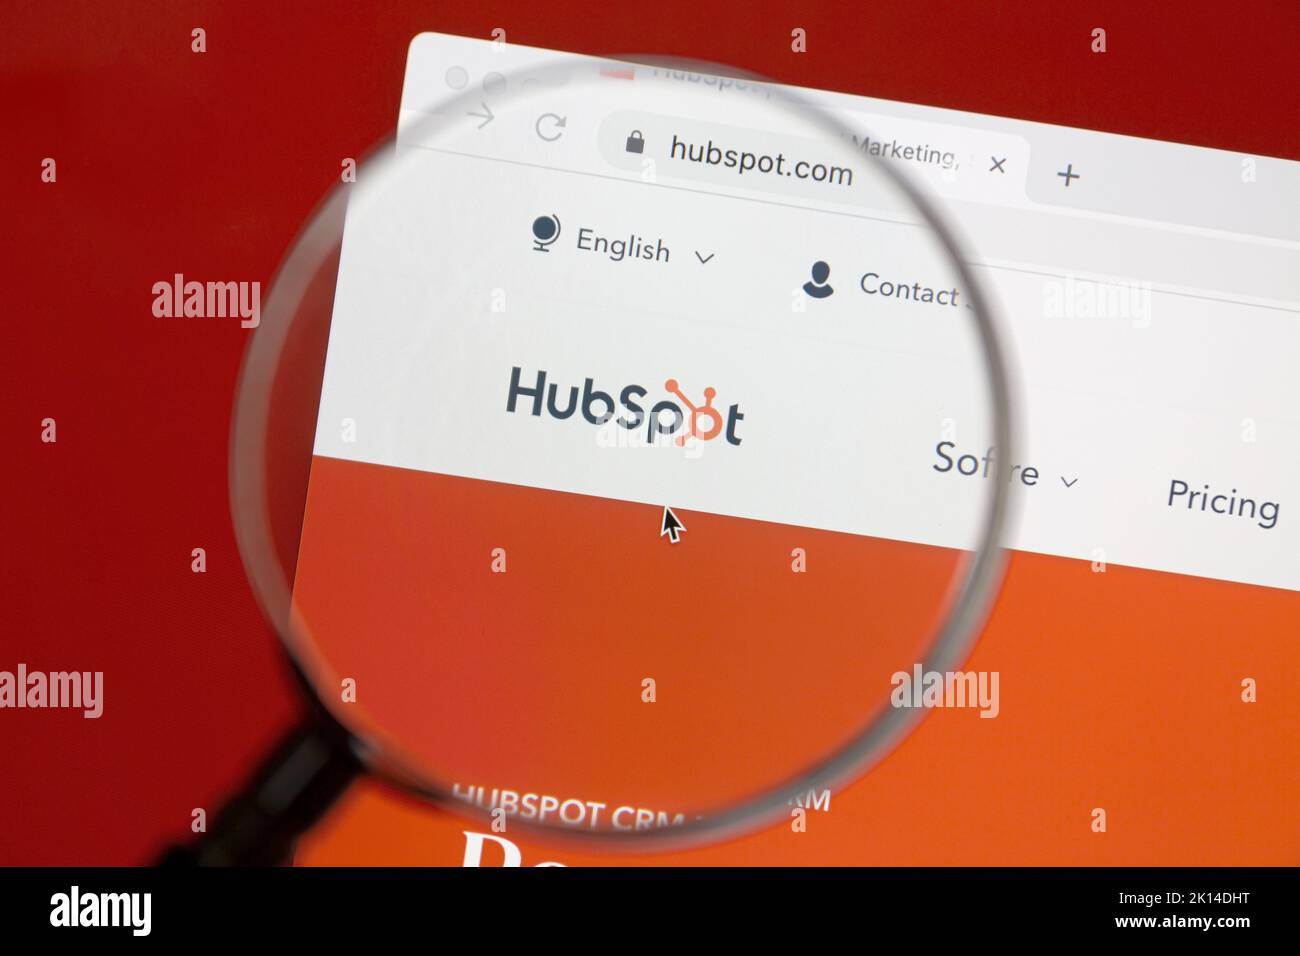 Ostersund, Sweden - June 29, 2022: Hubspot website on a computer screen. HubSpot is an American developer and marketer of software products. Stock Photo